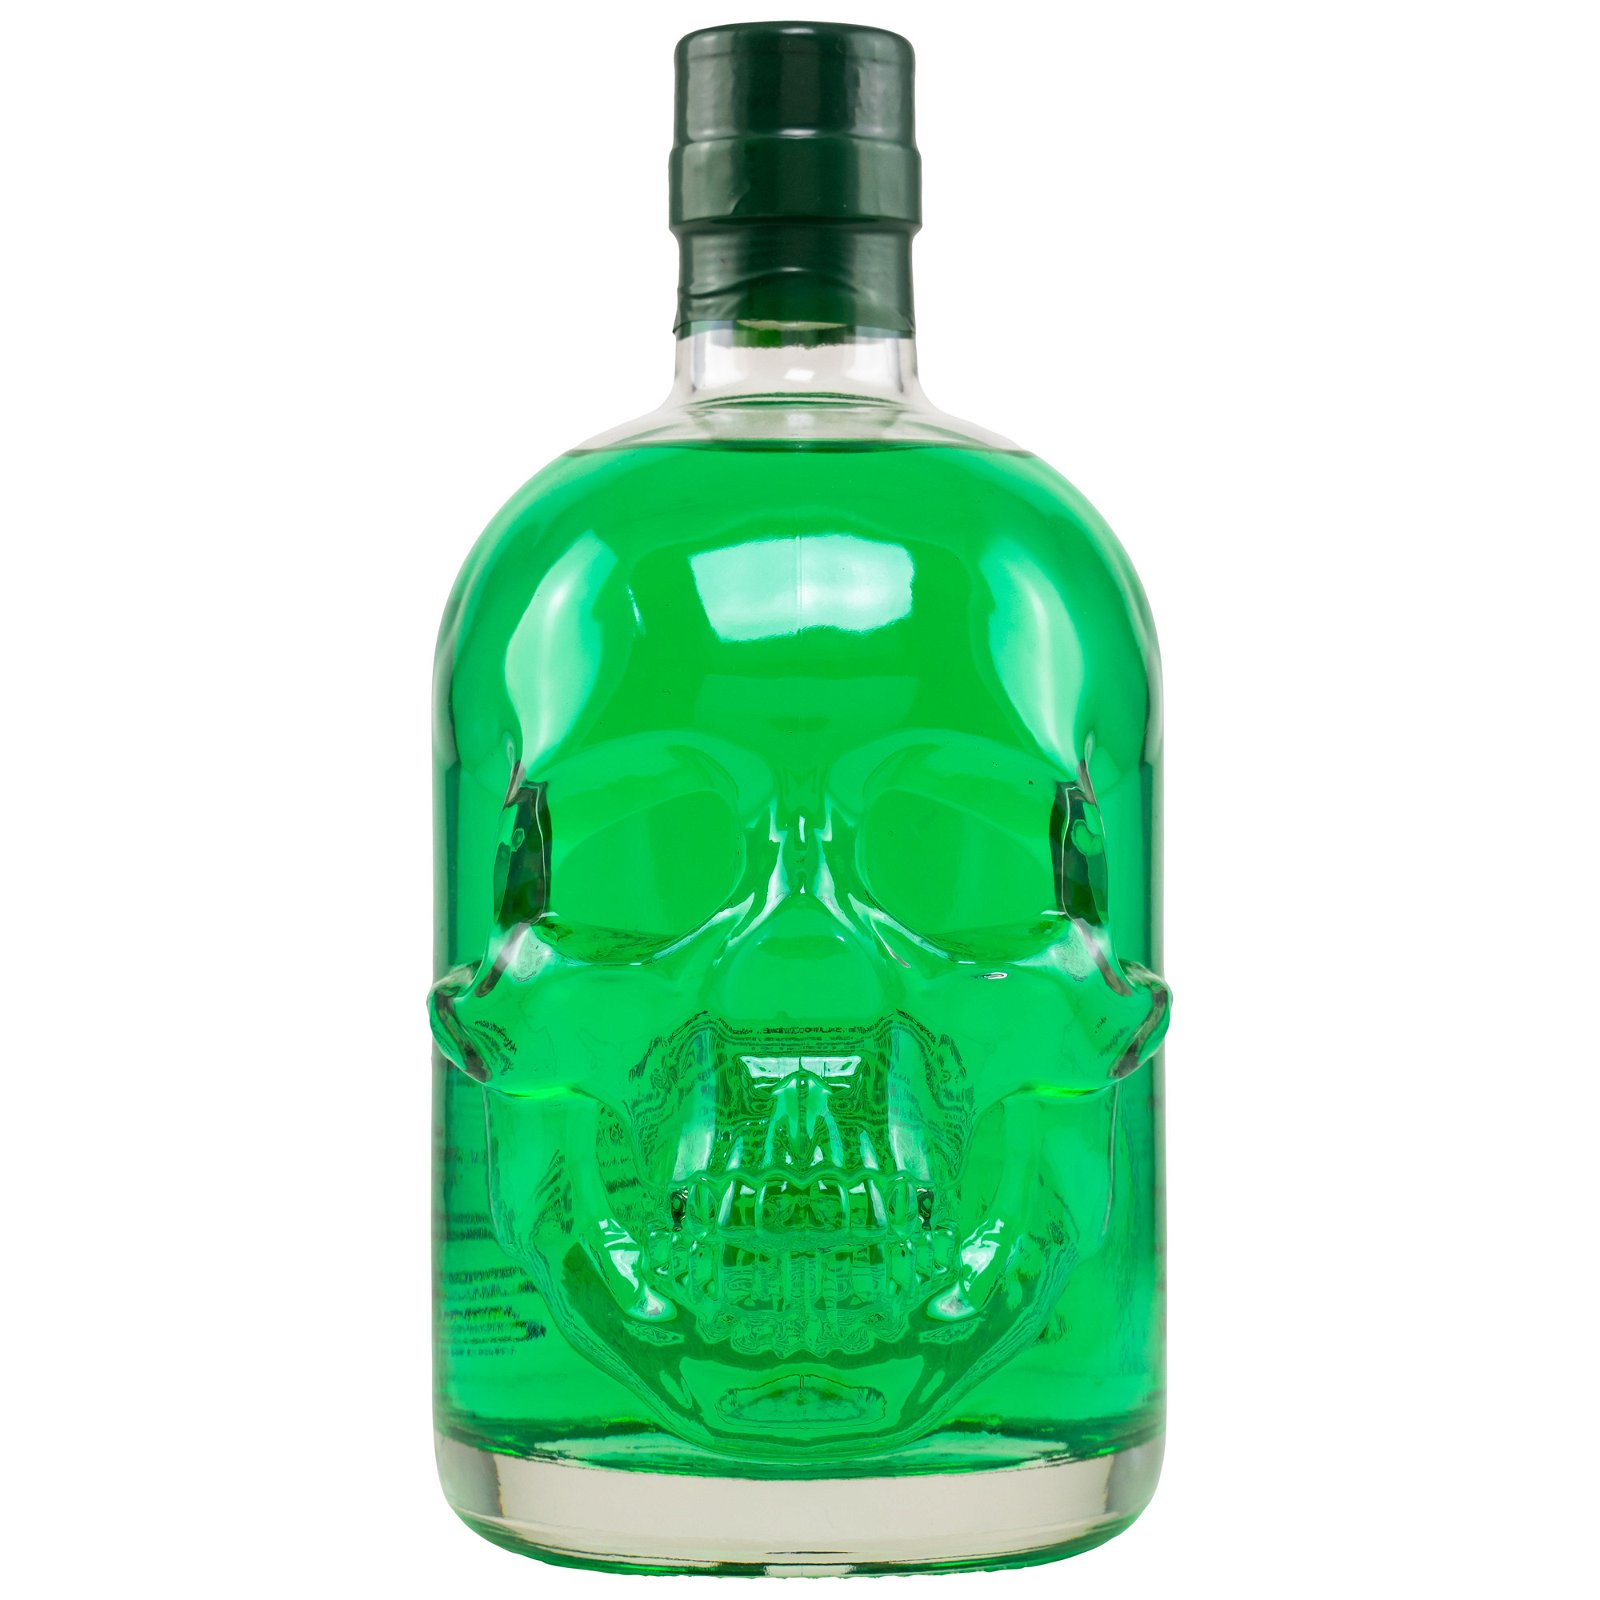 Hills SUICIDE Absinth Classic